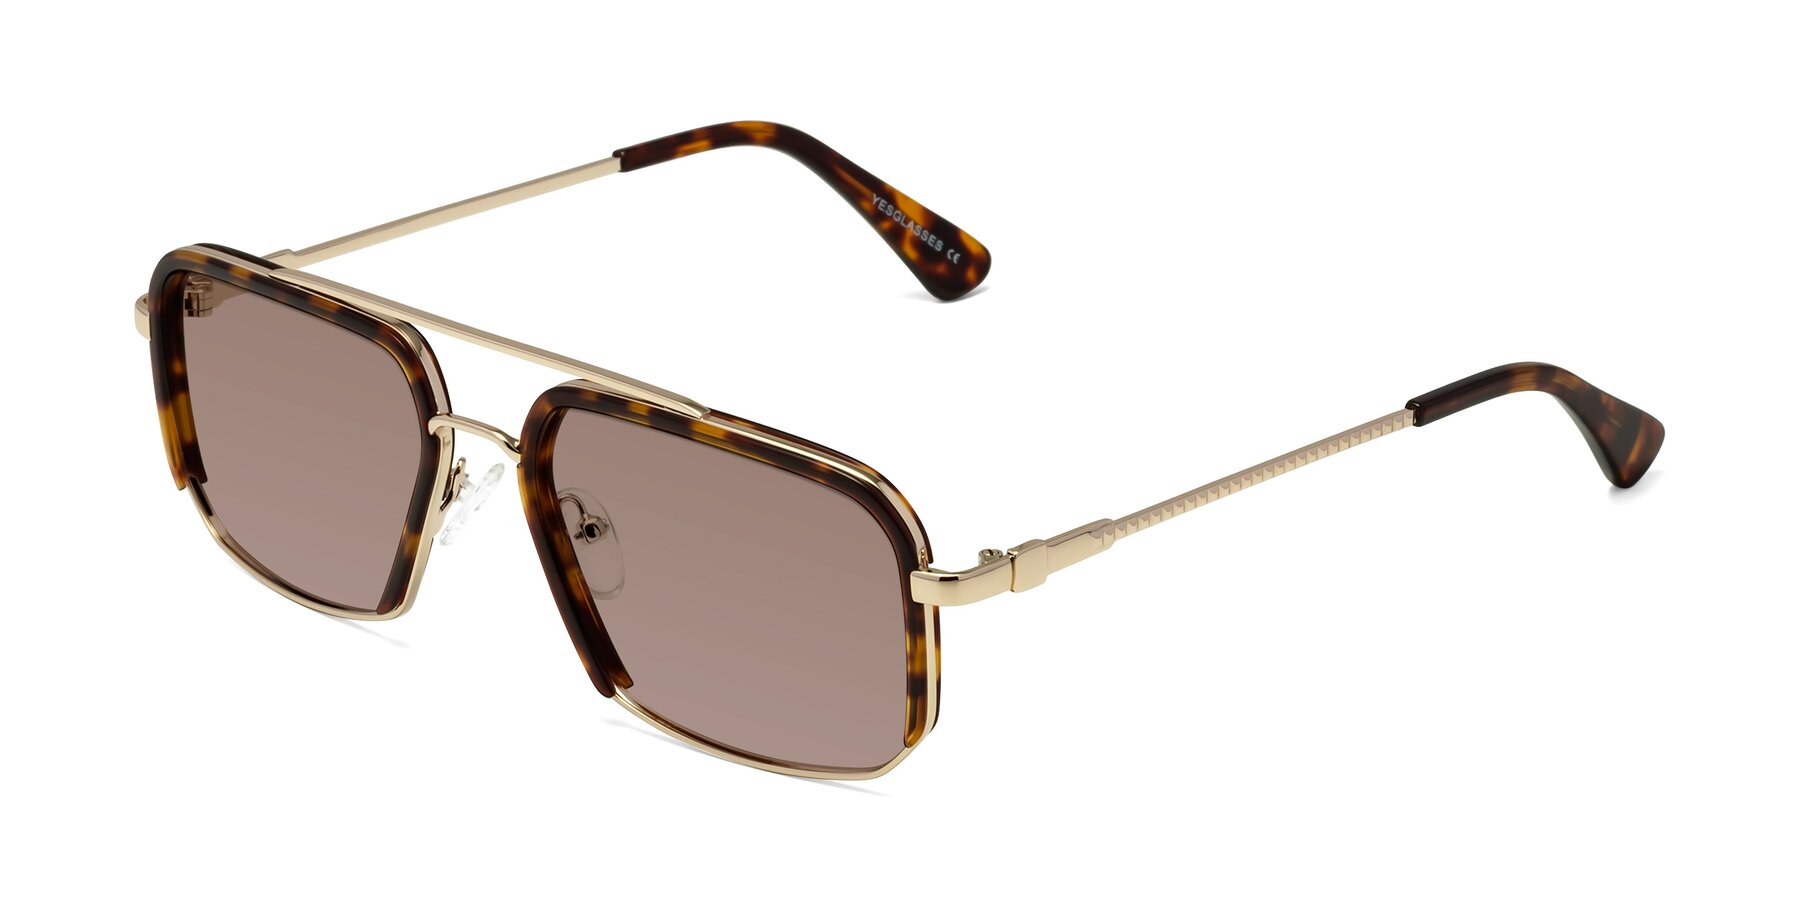 Angle of Dechter in Tortoise-Gold with Medium Brown Tinted Lenses